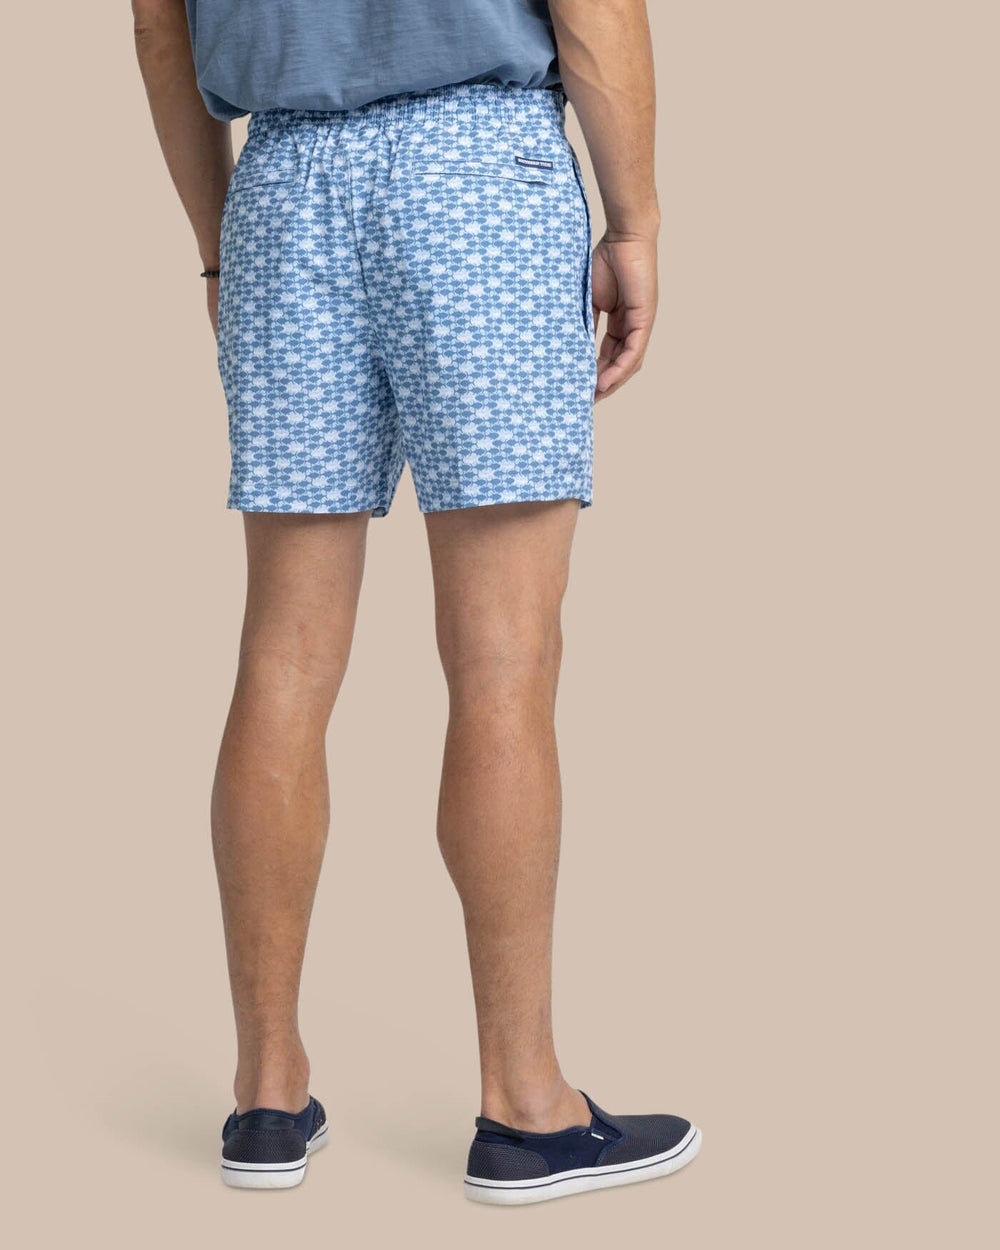 The back view of the Southern Tide Heather Skipping Jacks Swim Trunk by Southern Tide - Heather Clearwater Blue